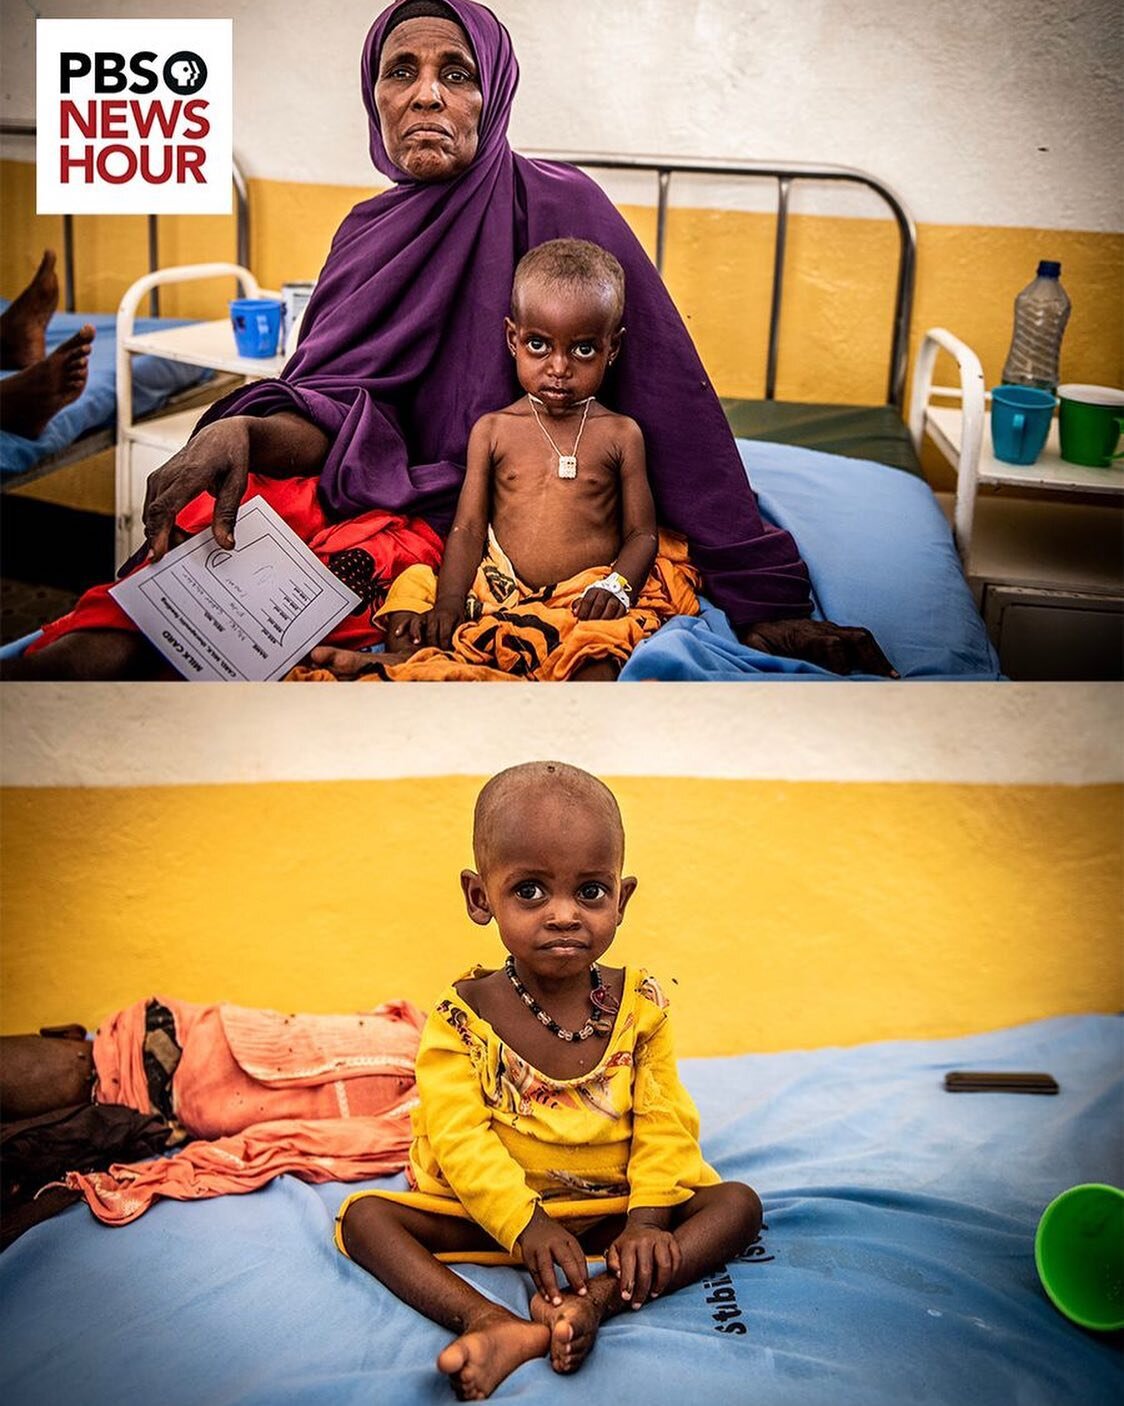 A humanitarian catastrophe is rapidly escalating in Somalia. 5 failed rainy seasons have led to a record drought. Now over half of Somalias 7 million population face chronic hunger. 
Tens of thousands are desperately fleeing their villages in search 